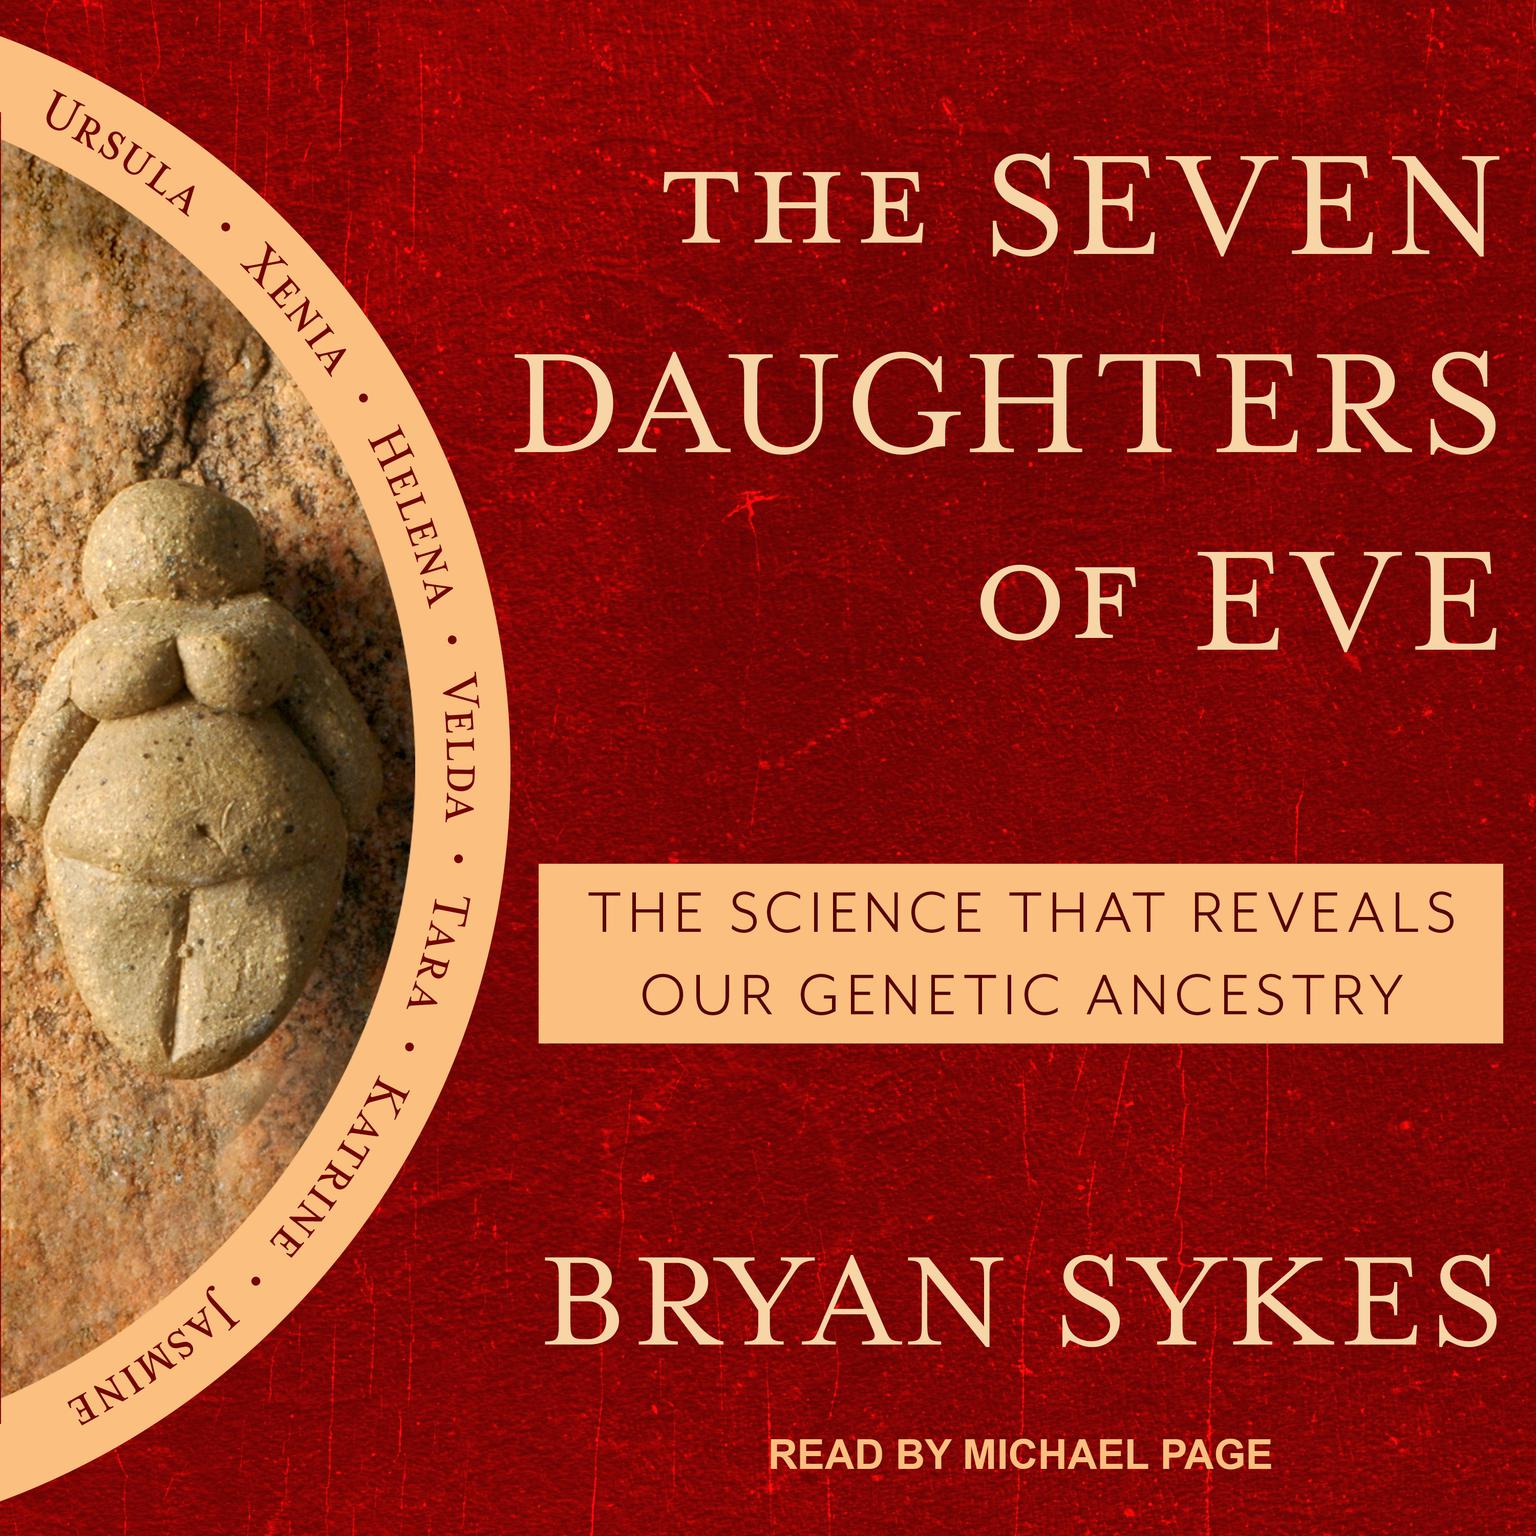 The Seven Daughters Of Eve Audiobook By Bryan Sykes — Download Now